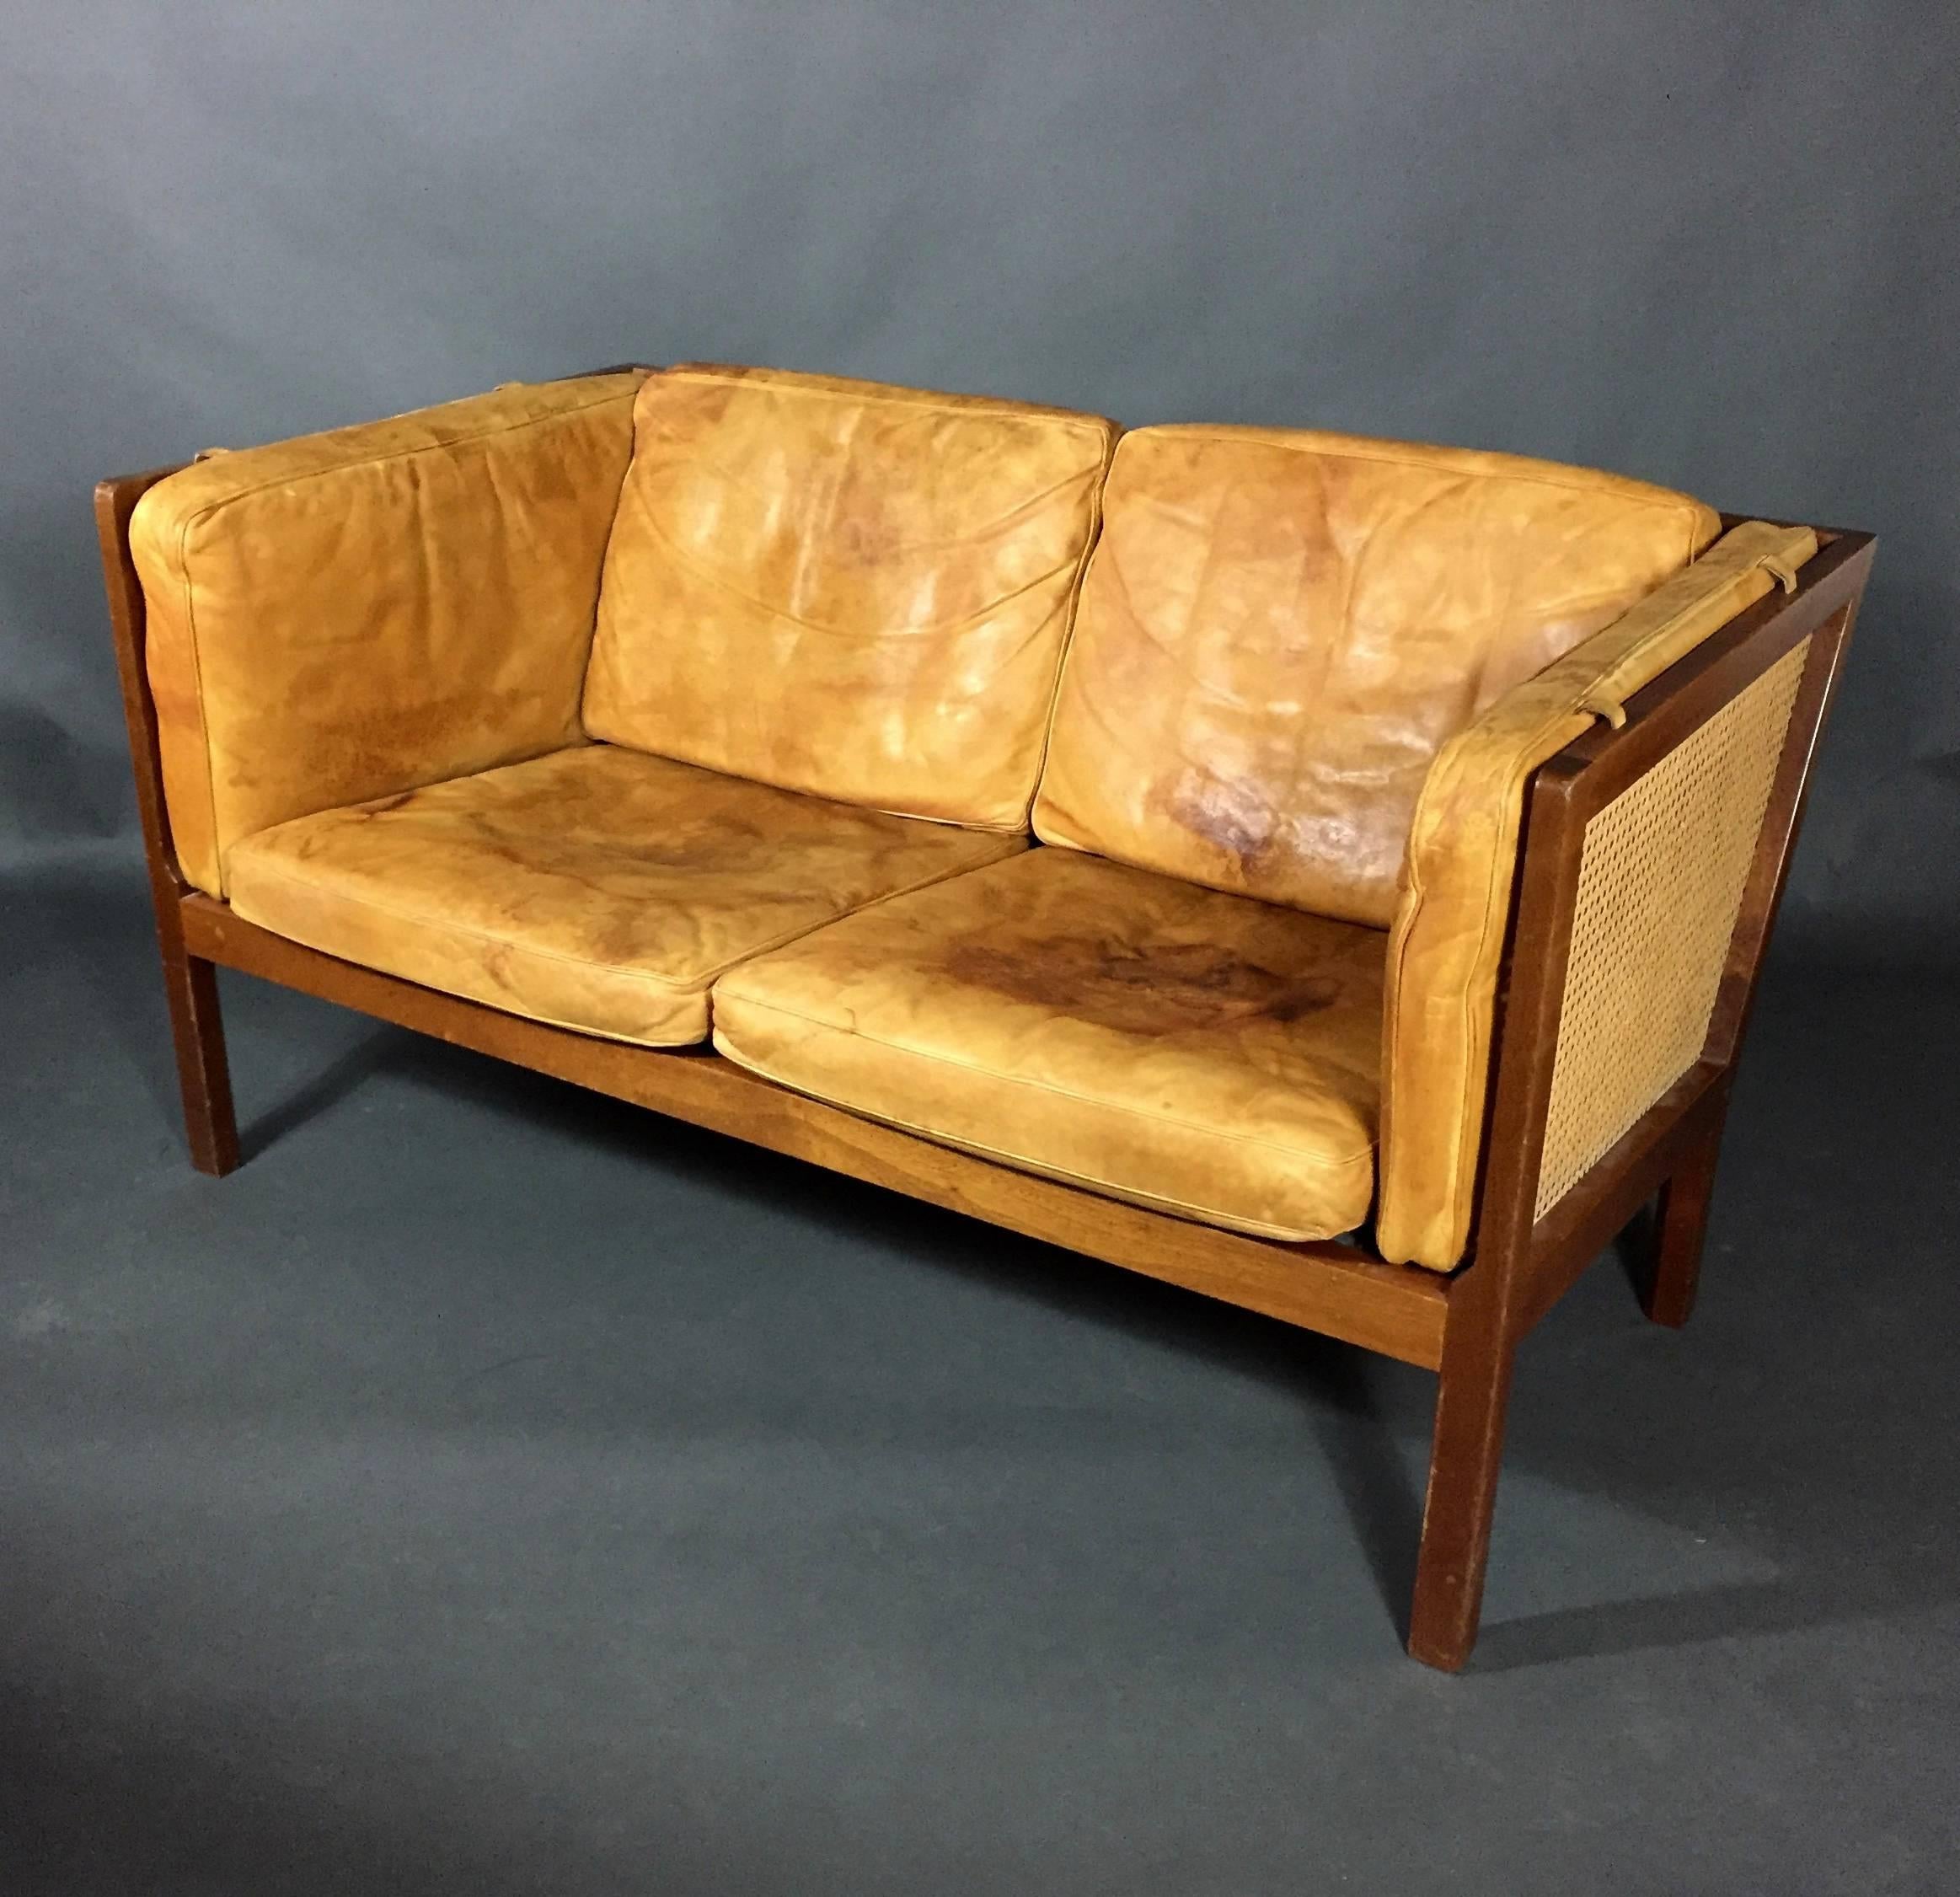 Mid-20th Century Bernt Petersen Two-Seat Leather and Cane Sofa by Wørts, Denmark, 1964